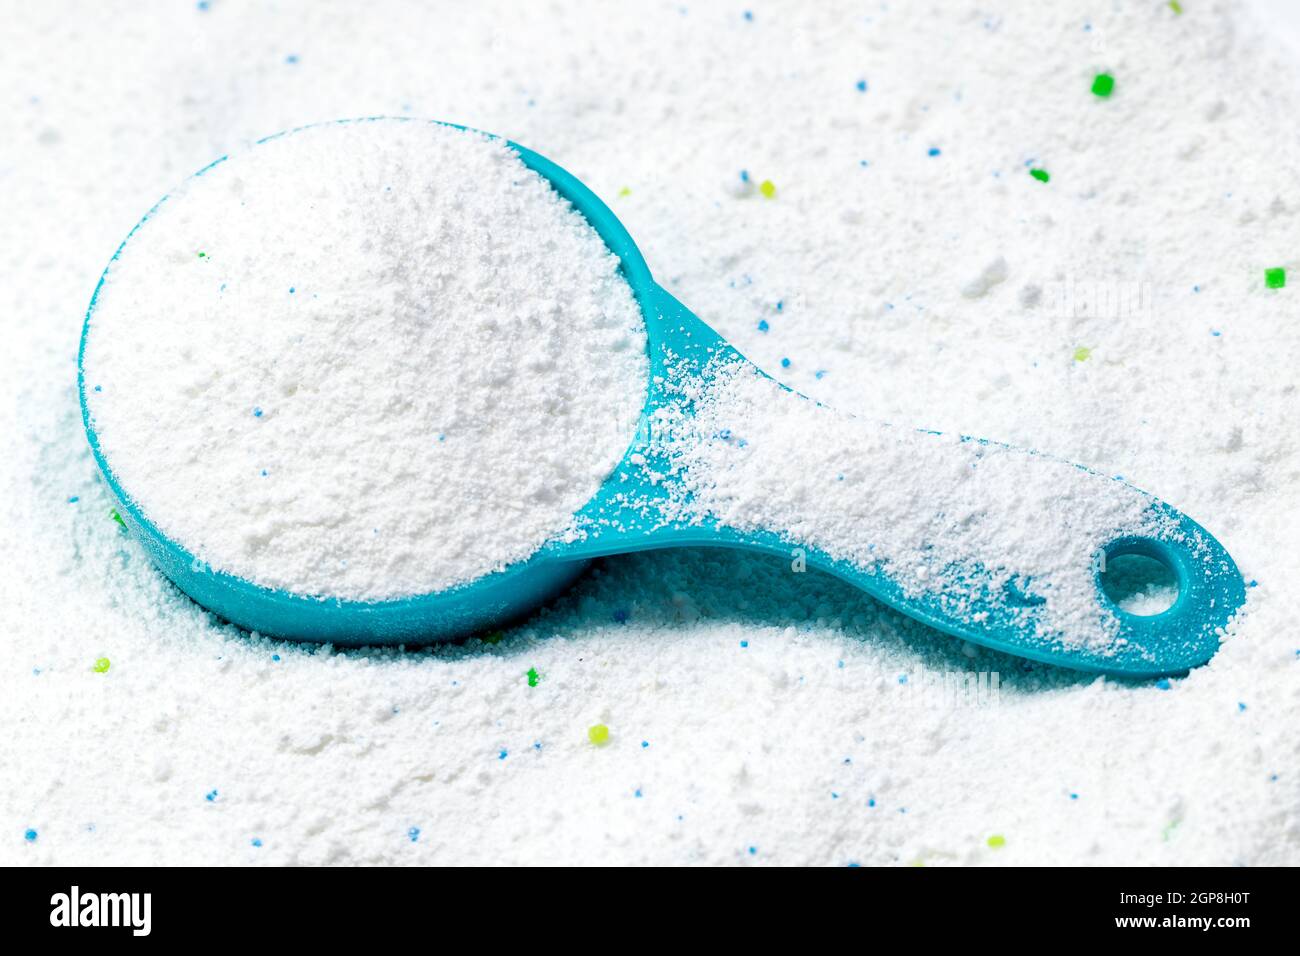 https://c8.alamy.com/comp/2GP8H0T/blue-cup-or-scoop-of-white-powder-detergent-for-clothes-washing-2GP8H0T.jpg